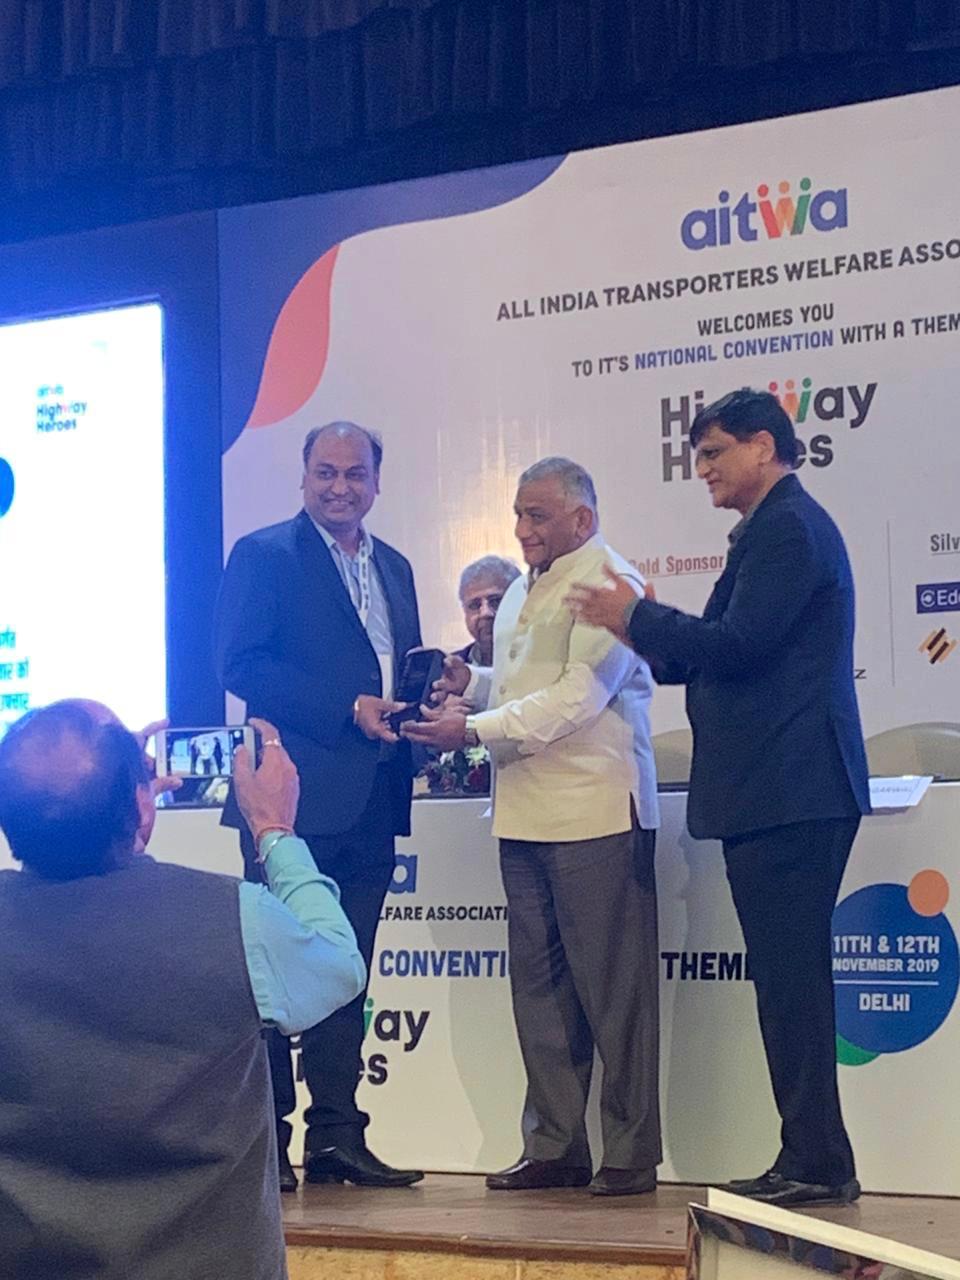 Mr. Anjani Kumar Agarwal, CEO, DRS Group receiving Pride of India award from General V K Singh (retired), Minister of State for Road Transport and Highways in New Delhi